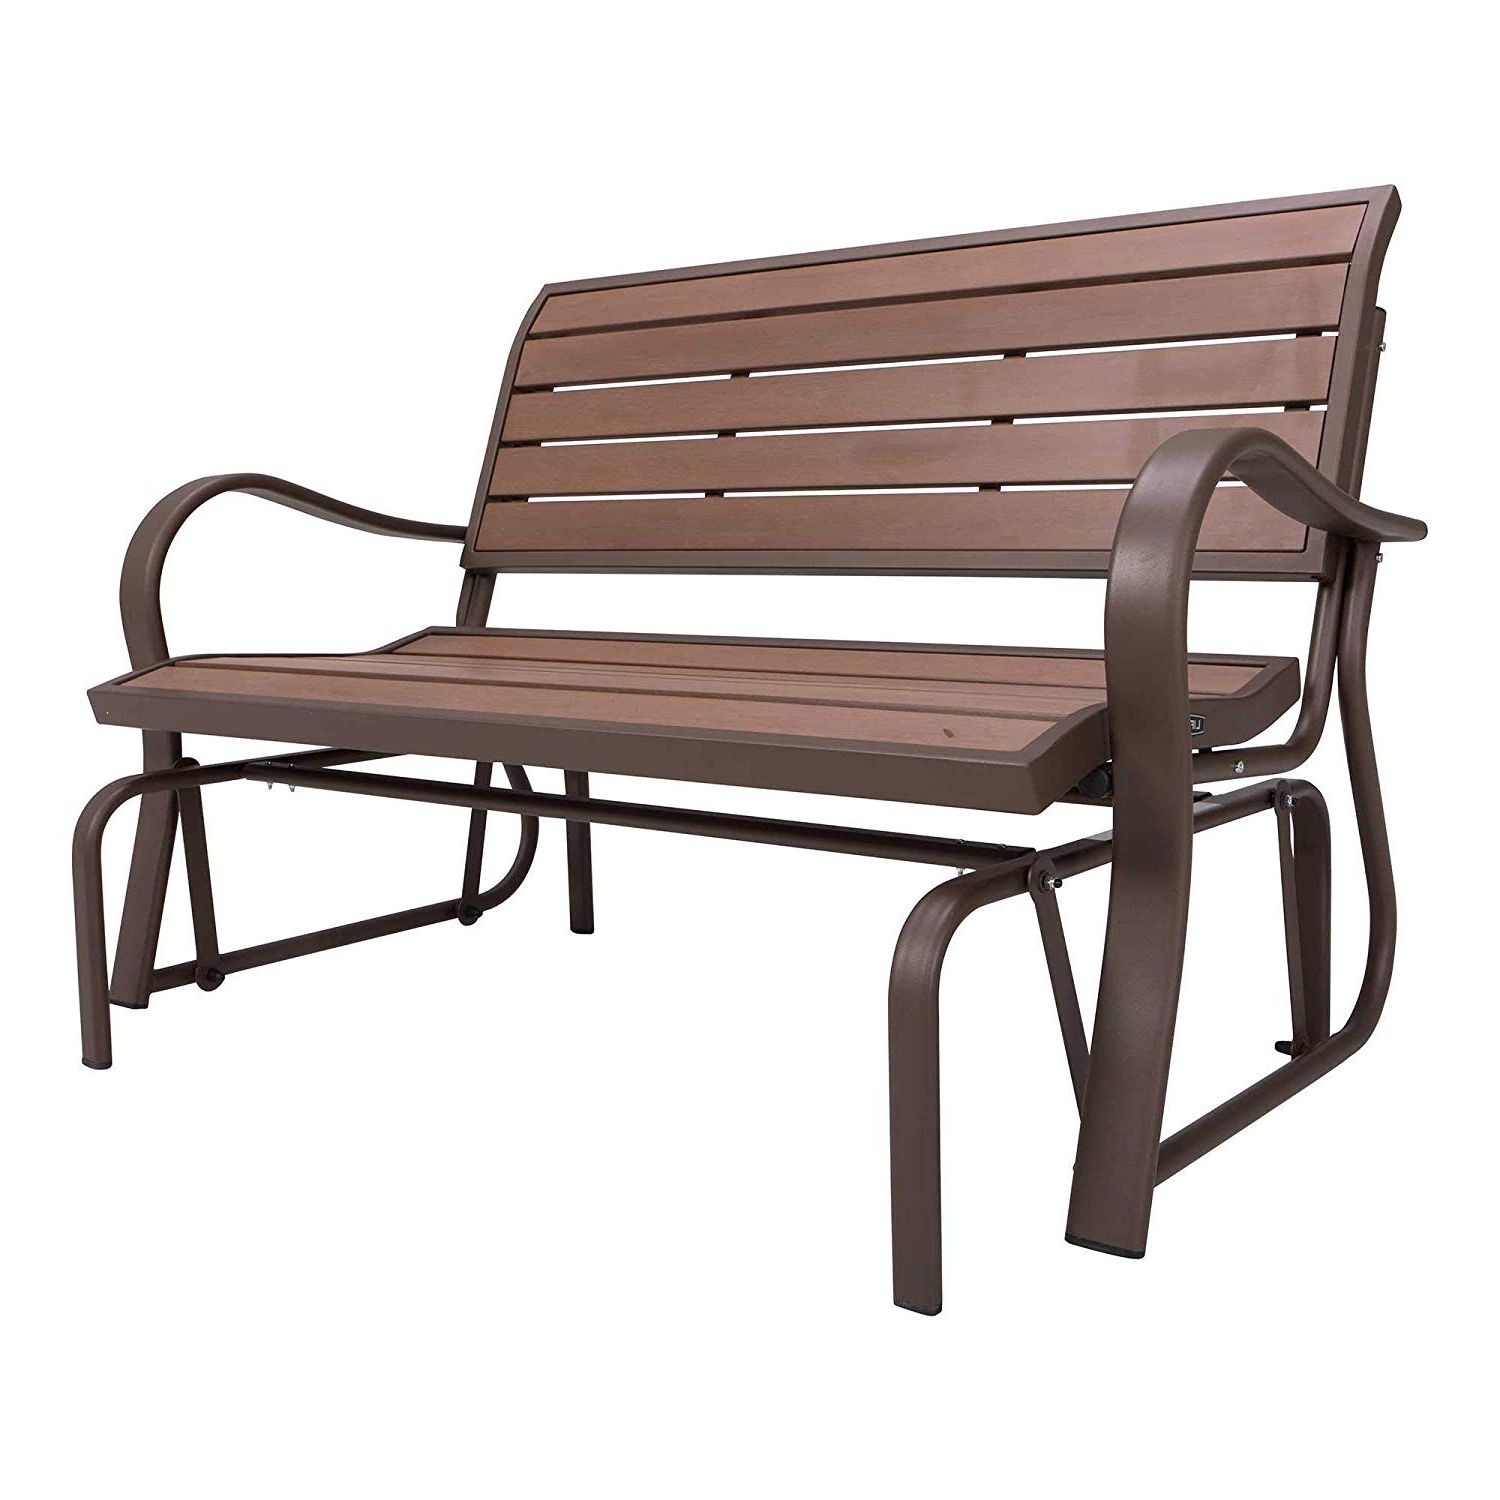 Indoor/outdoor Double Glider Benches With Latest Lifetime Outdoor Glider Bench With Bottle (brown) (View 9 of 30)